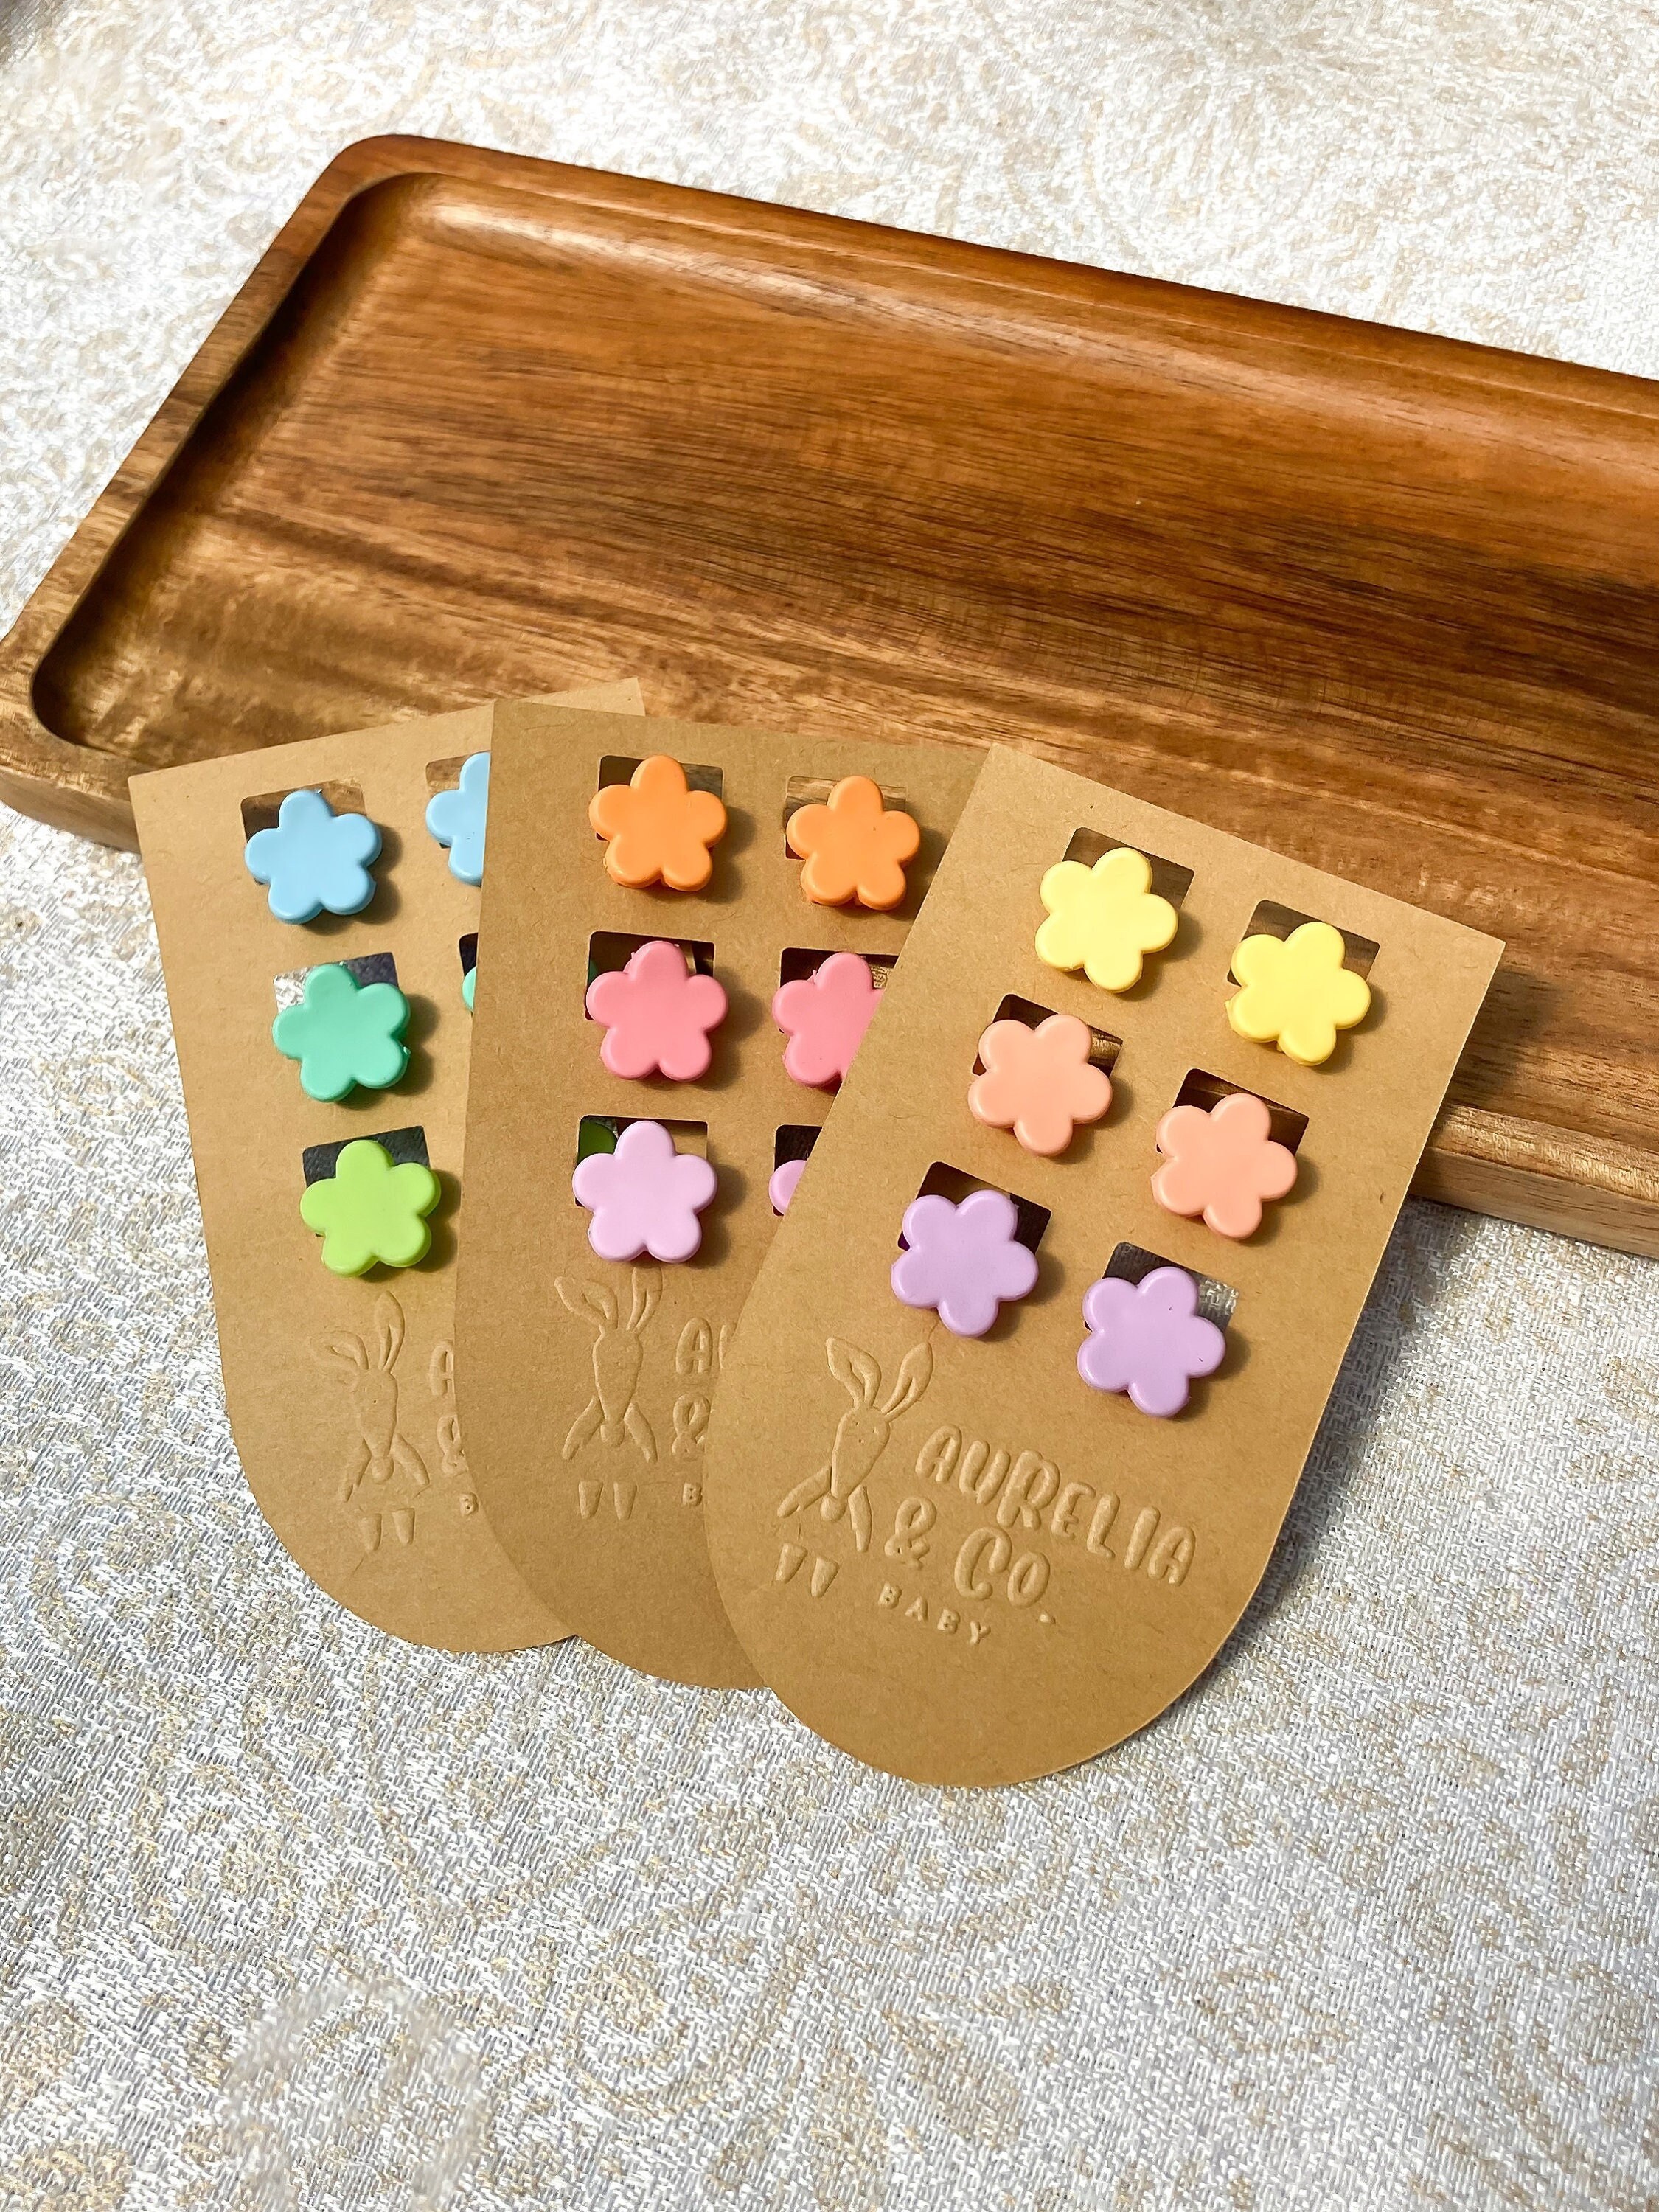 13pcs TINY PLASTIC BABIES Vintage Mini Baby Dolls Painted Faces Miniature  Dollhouse Shower Party Favors Crafting Supply Lot 